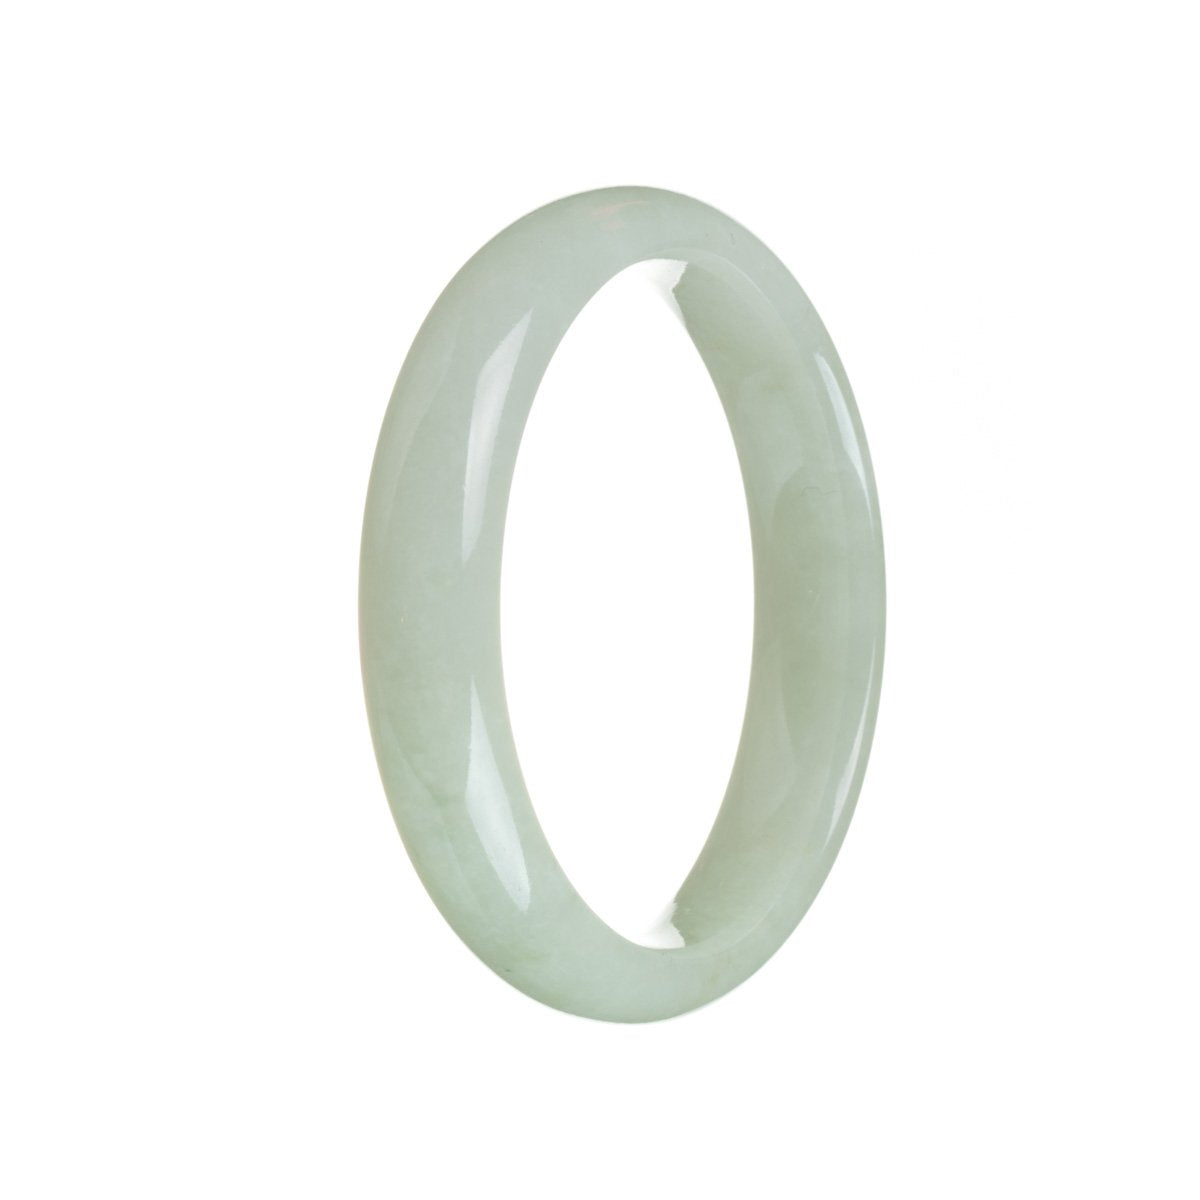 A close-up image of a white Burmese jade bracelet in the shape of a half moon, measuring 56mm in diameter. The bracelet appears to be made of high-quality, genuine grade A jade.